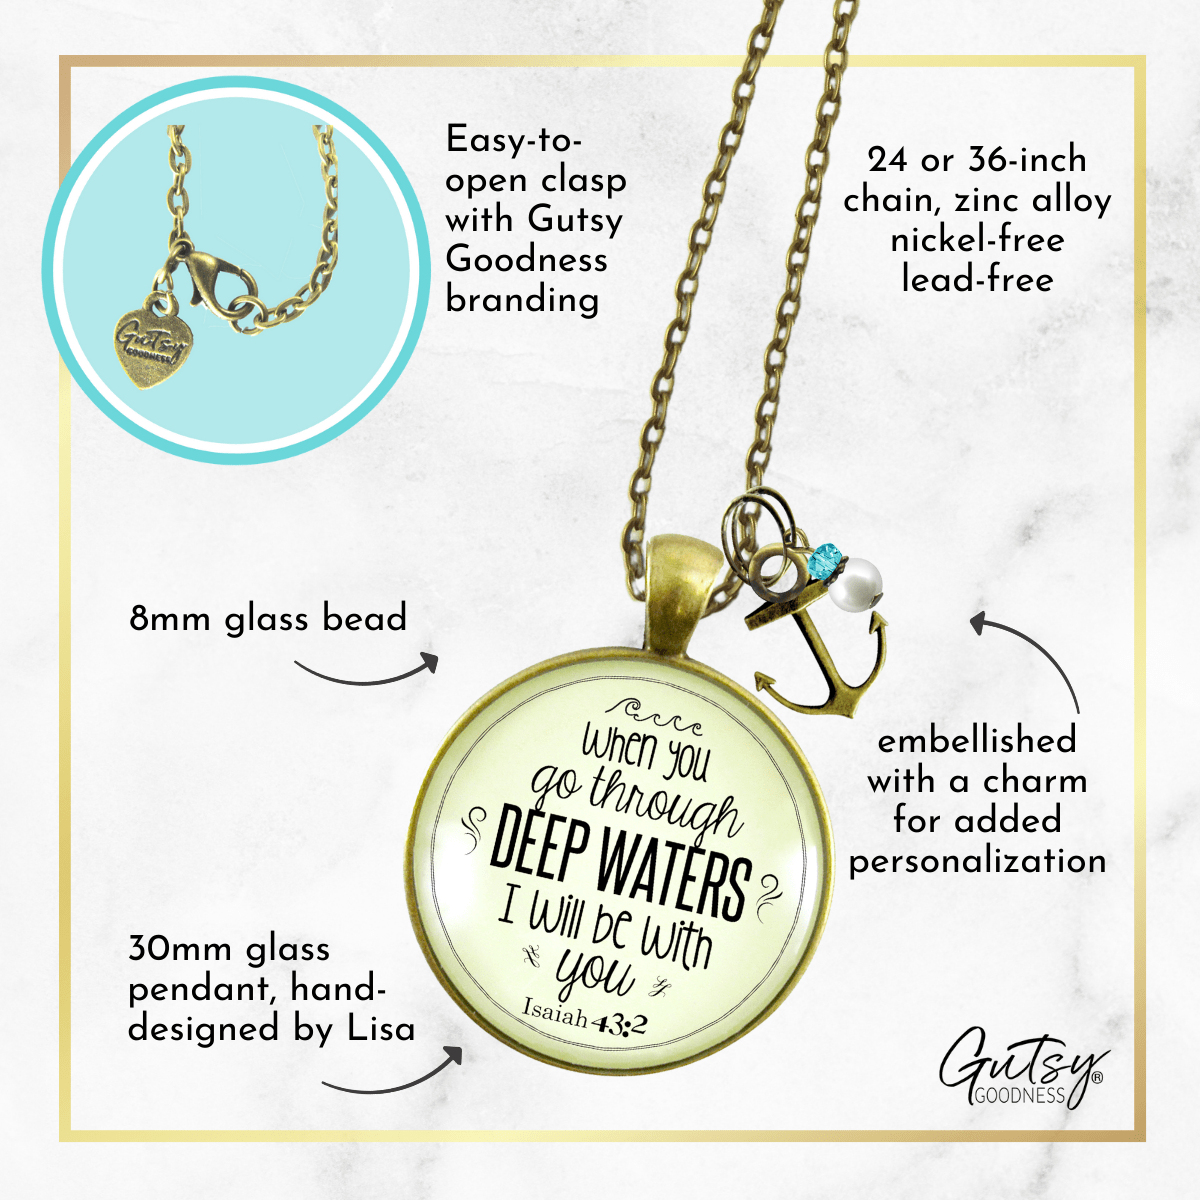 Gutsy Goodness Faith Necklace Go Through Deep Waters Encouragement Scripture Jewelry - Gutsy Goodness;Faith Necklace Go Through Deep Waters Encouragement Scripture Jewelry - Gutsy Goodness Handmade Jewelry Gifts